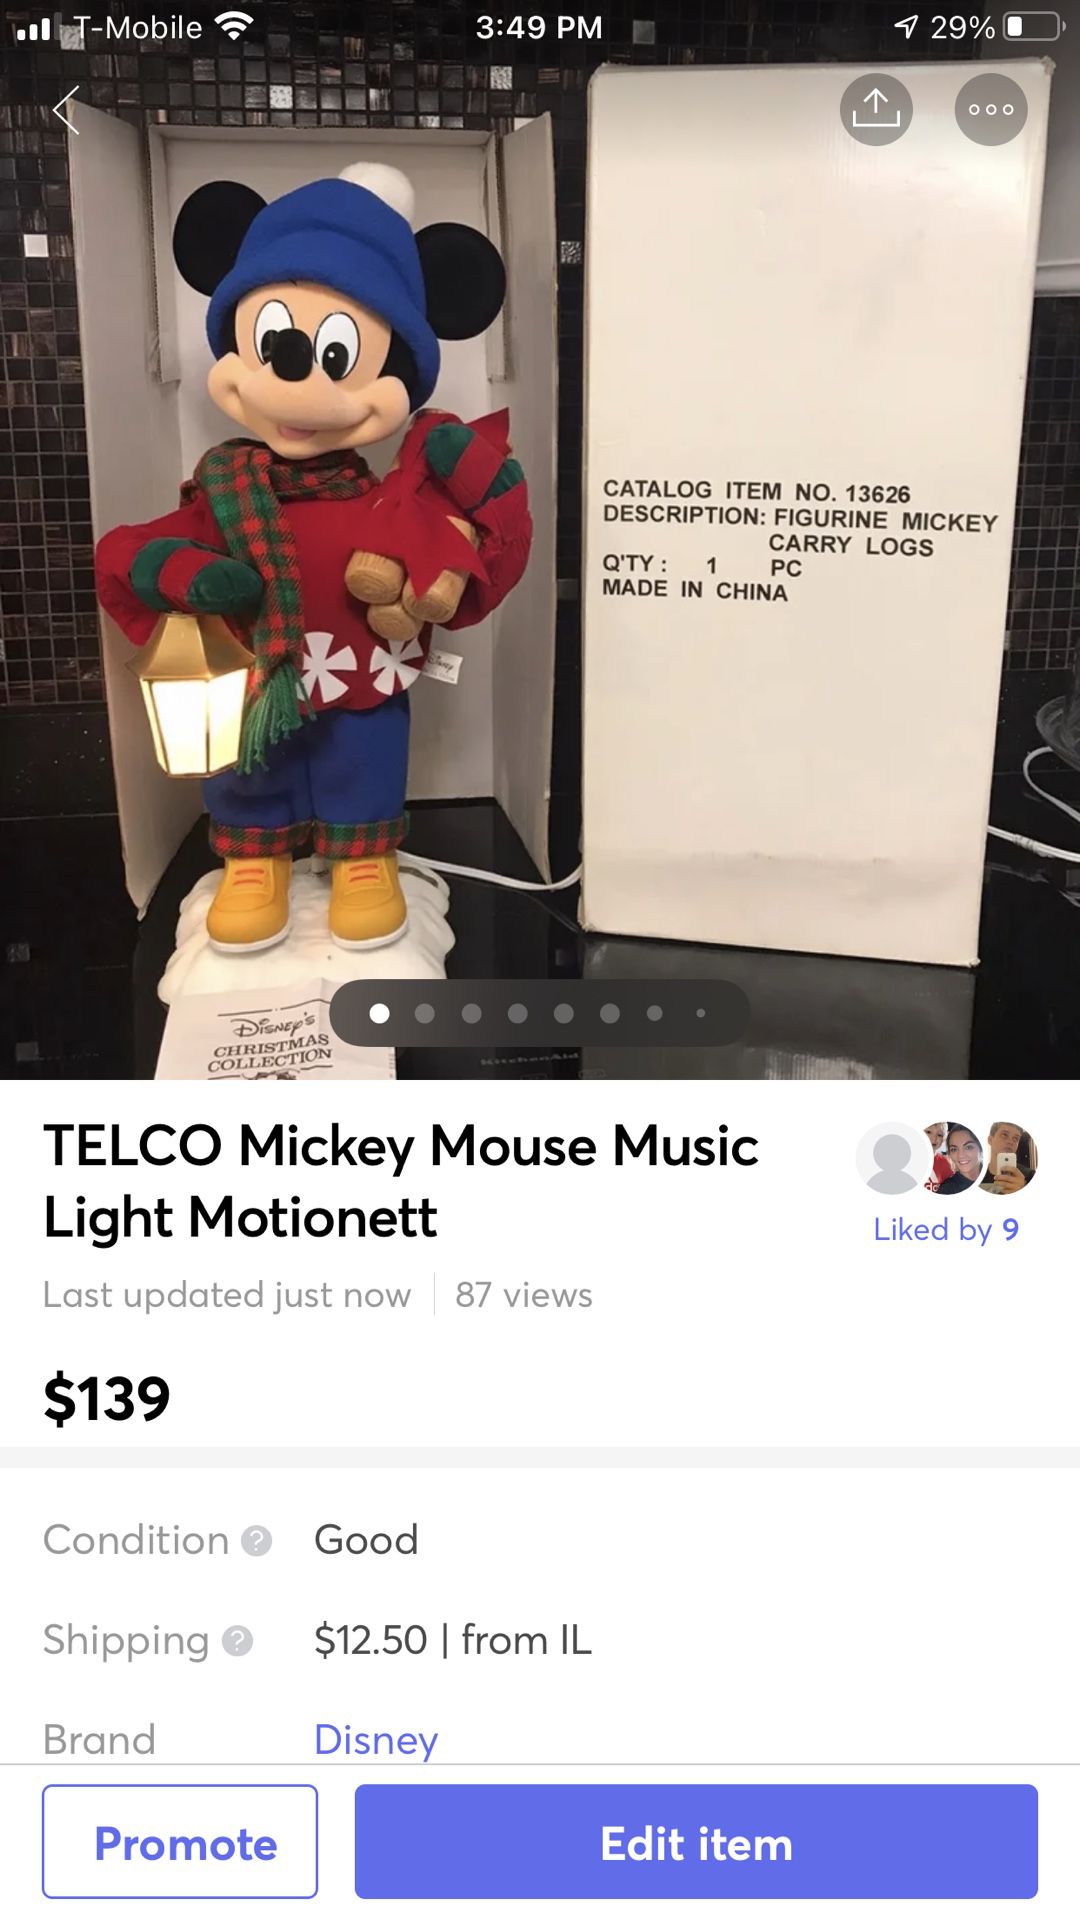 Telco Disney World Mickey Mouse Motionette